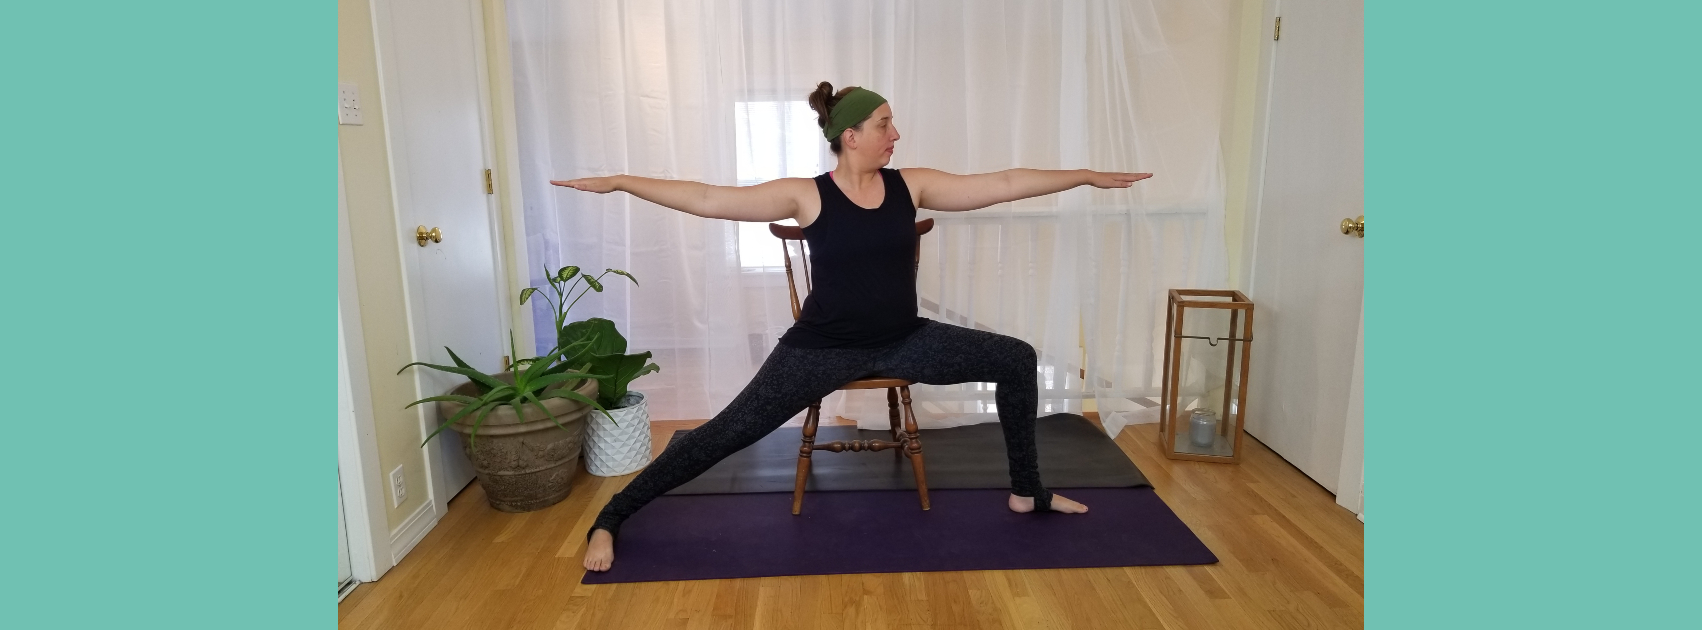 chair yoga sequence for seniors